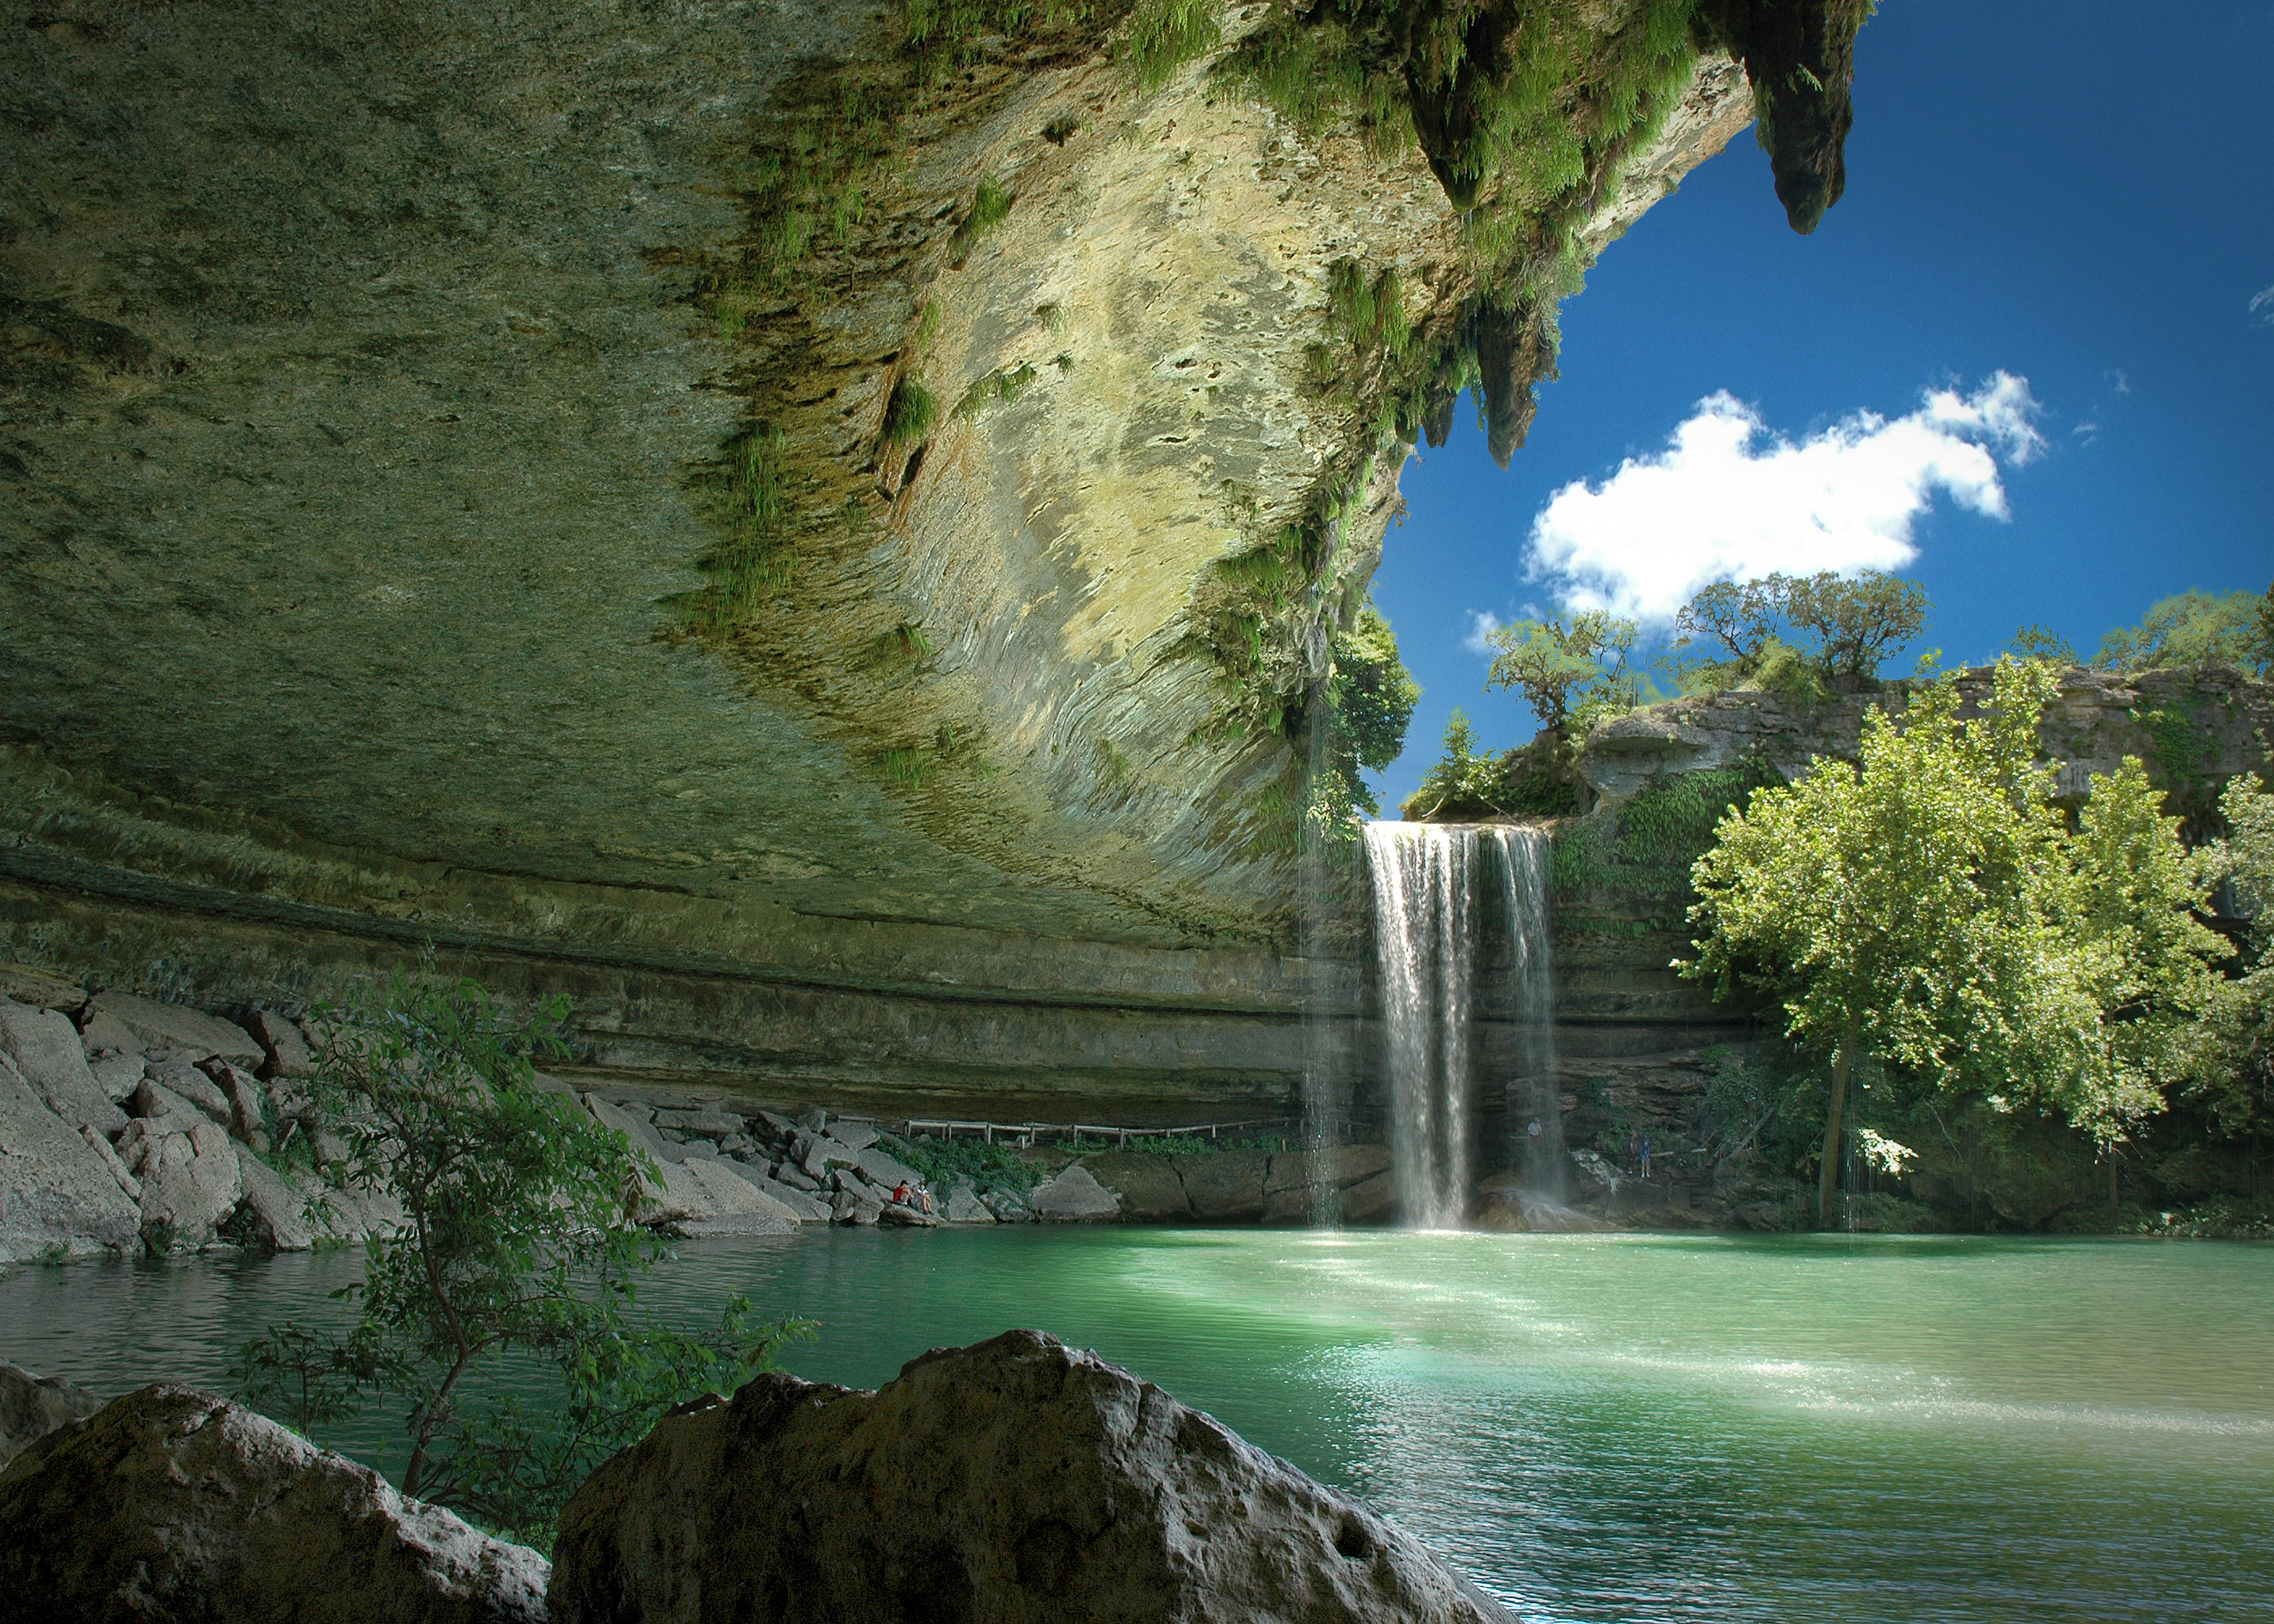 Travis County commissioners delay approving RV park proposal near Hamilton Pool Preserve as residents raise concern